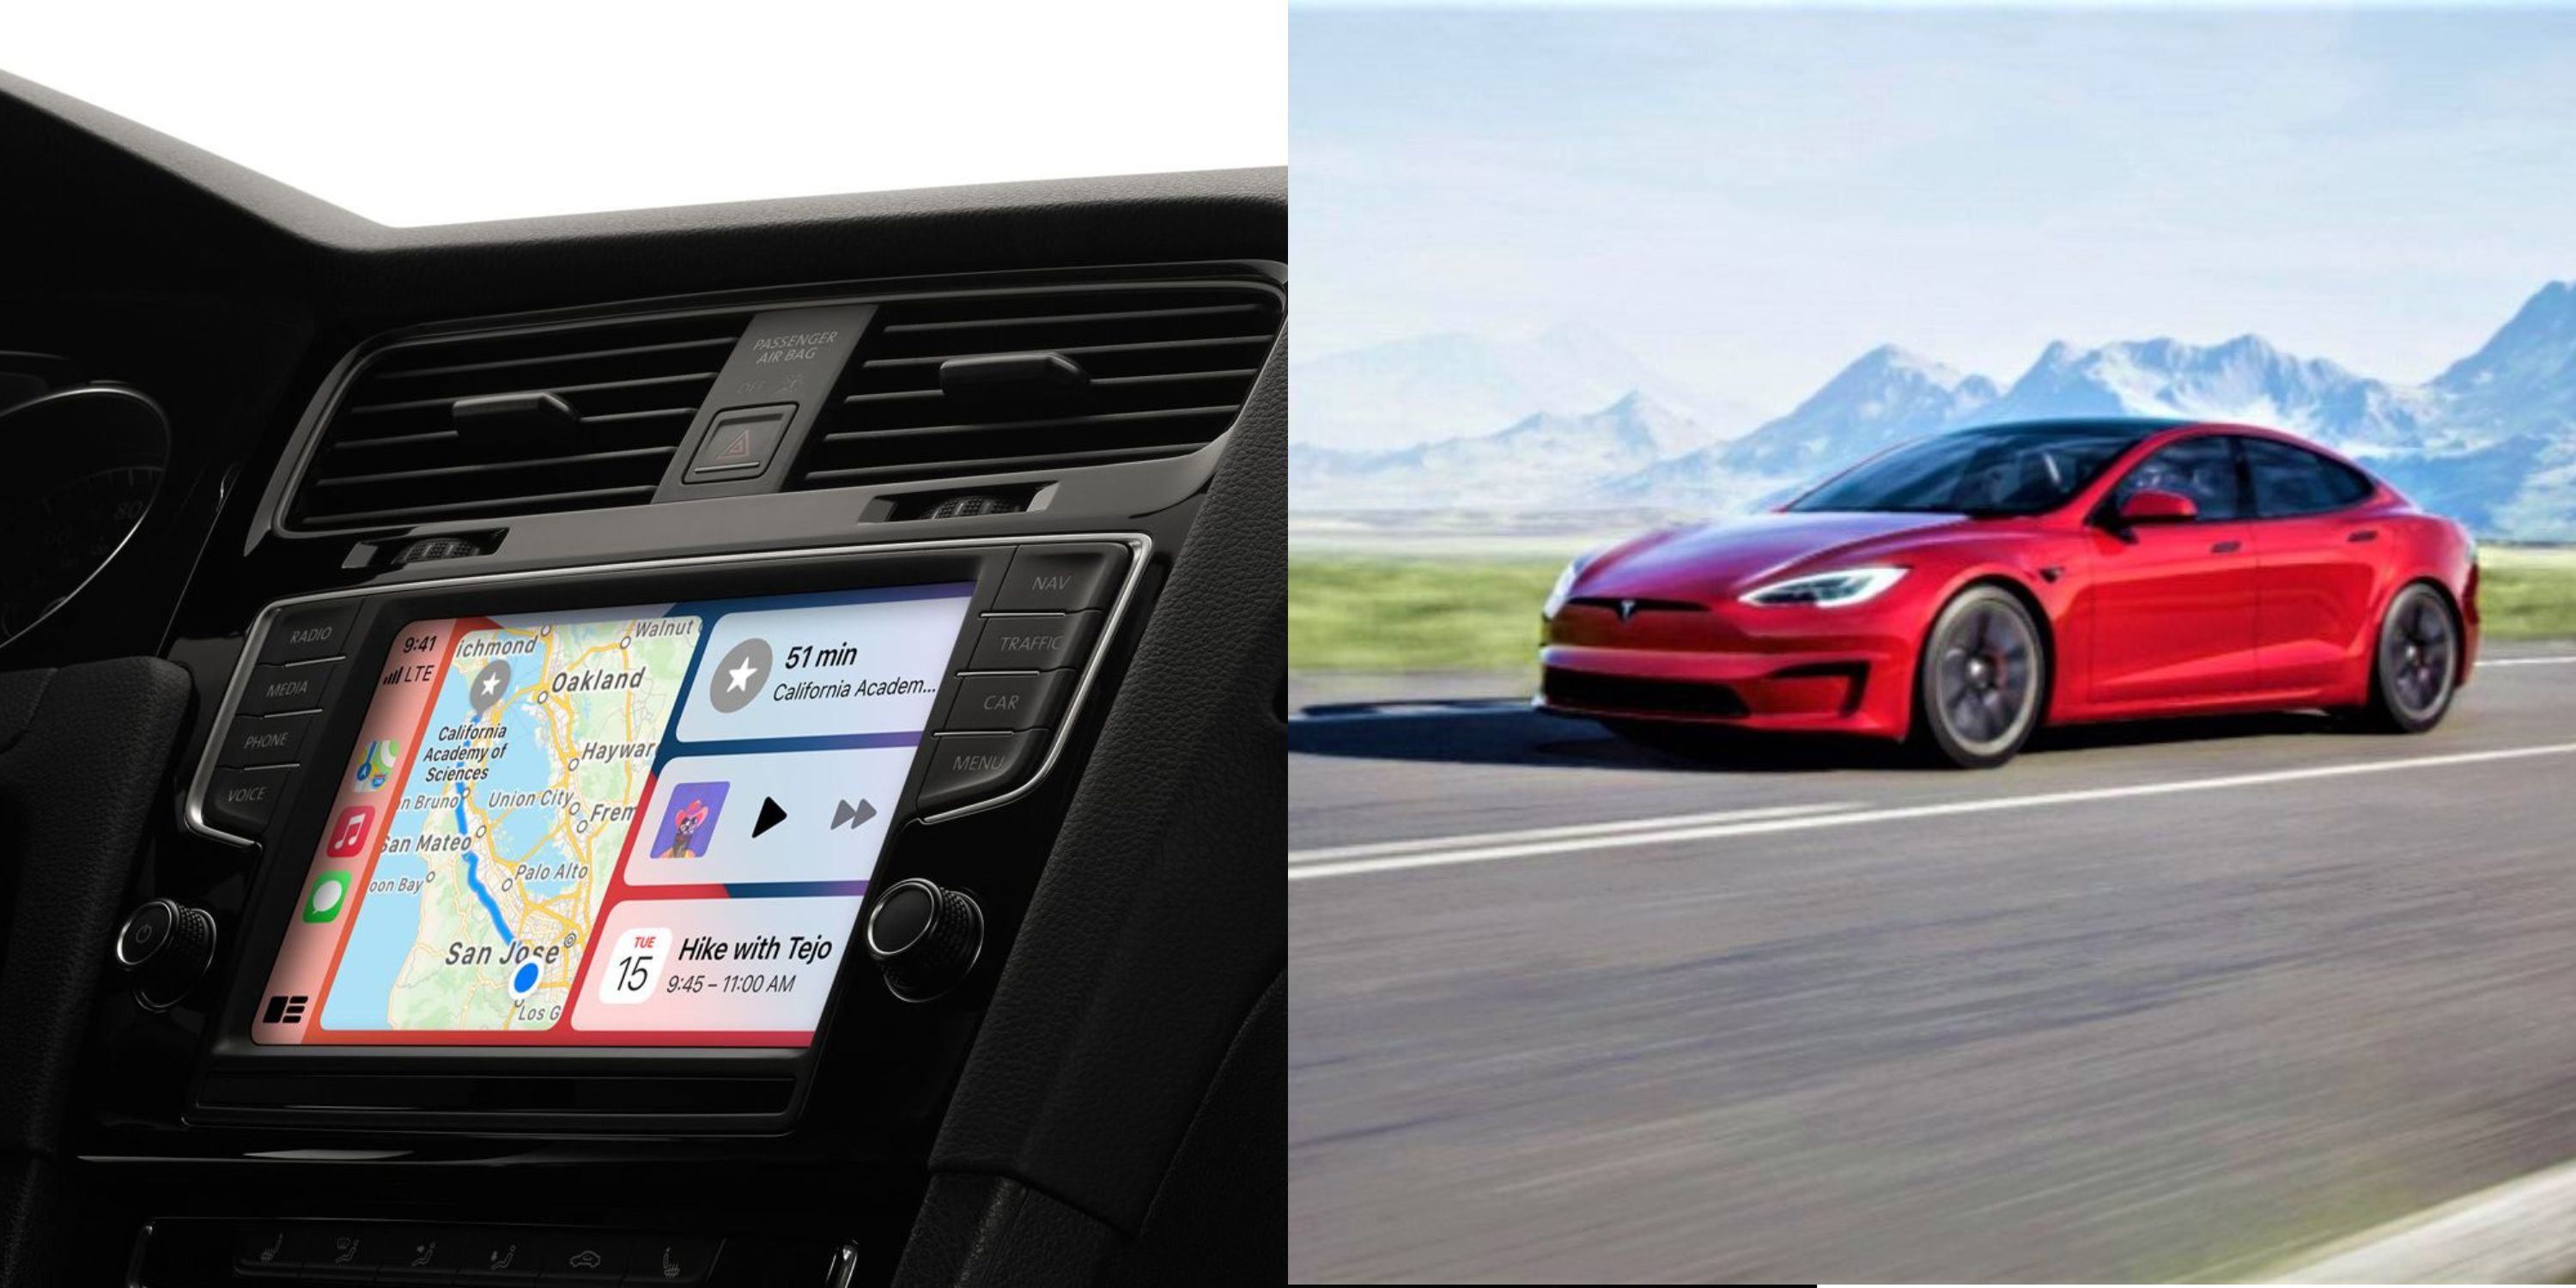 Featured image a car display using Apple CarPlay and a Tesla on the road